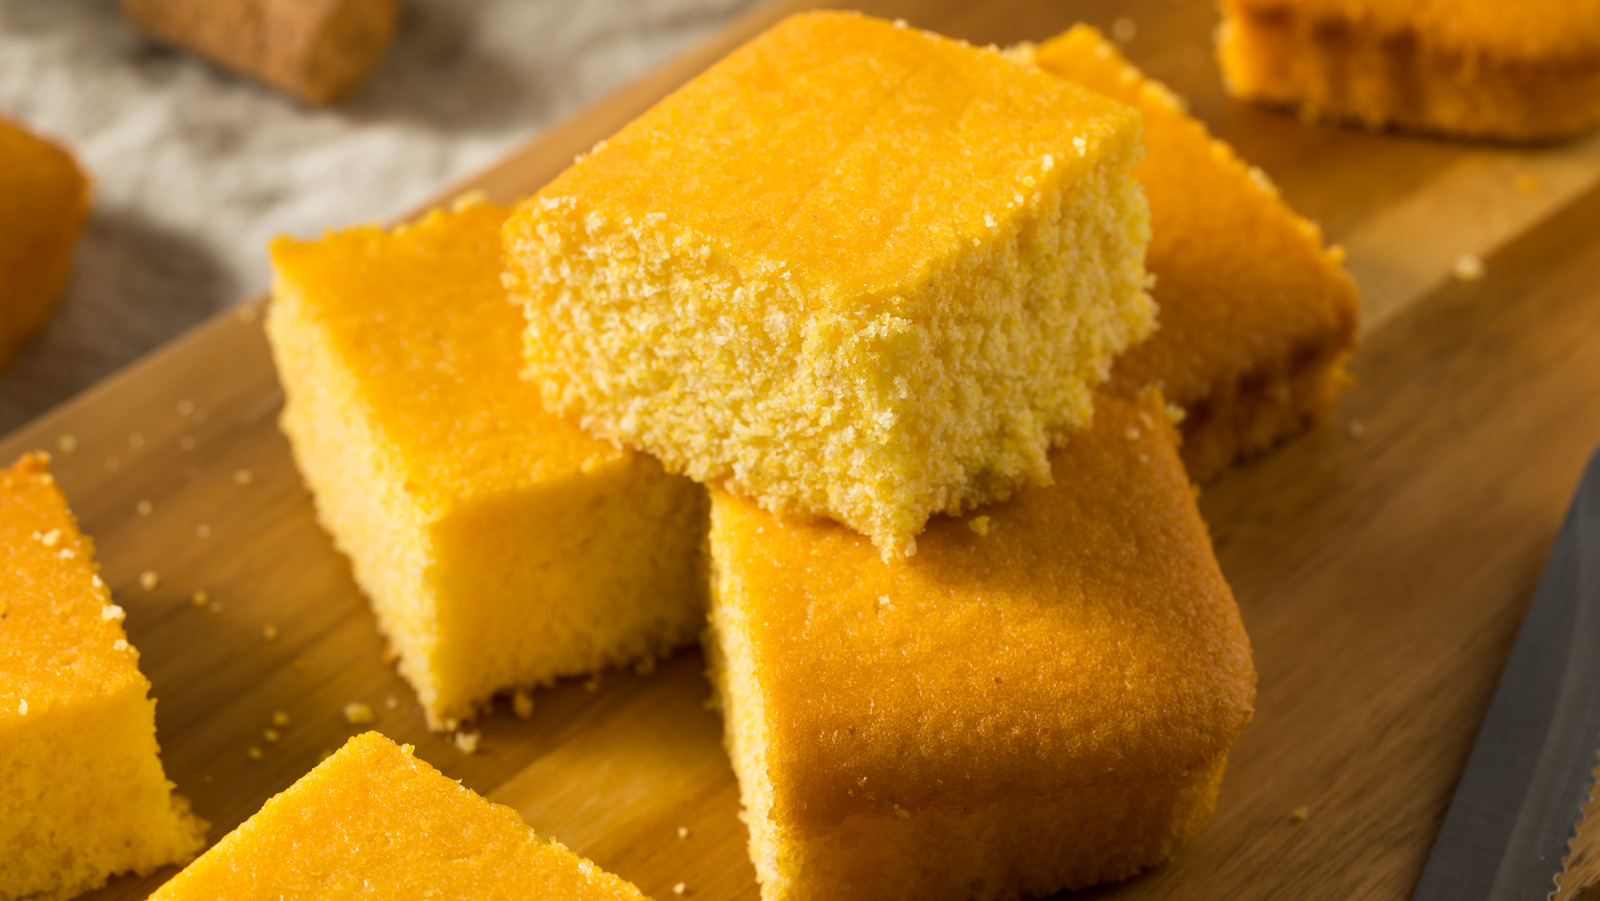 https://www.thedailymeal.com/img/gallery/the-difference-in-cornbread-depending-on-where-you-are-in-the-us/l-intro-1700242397.jpg